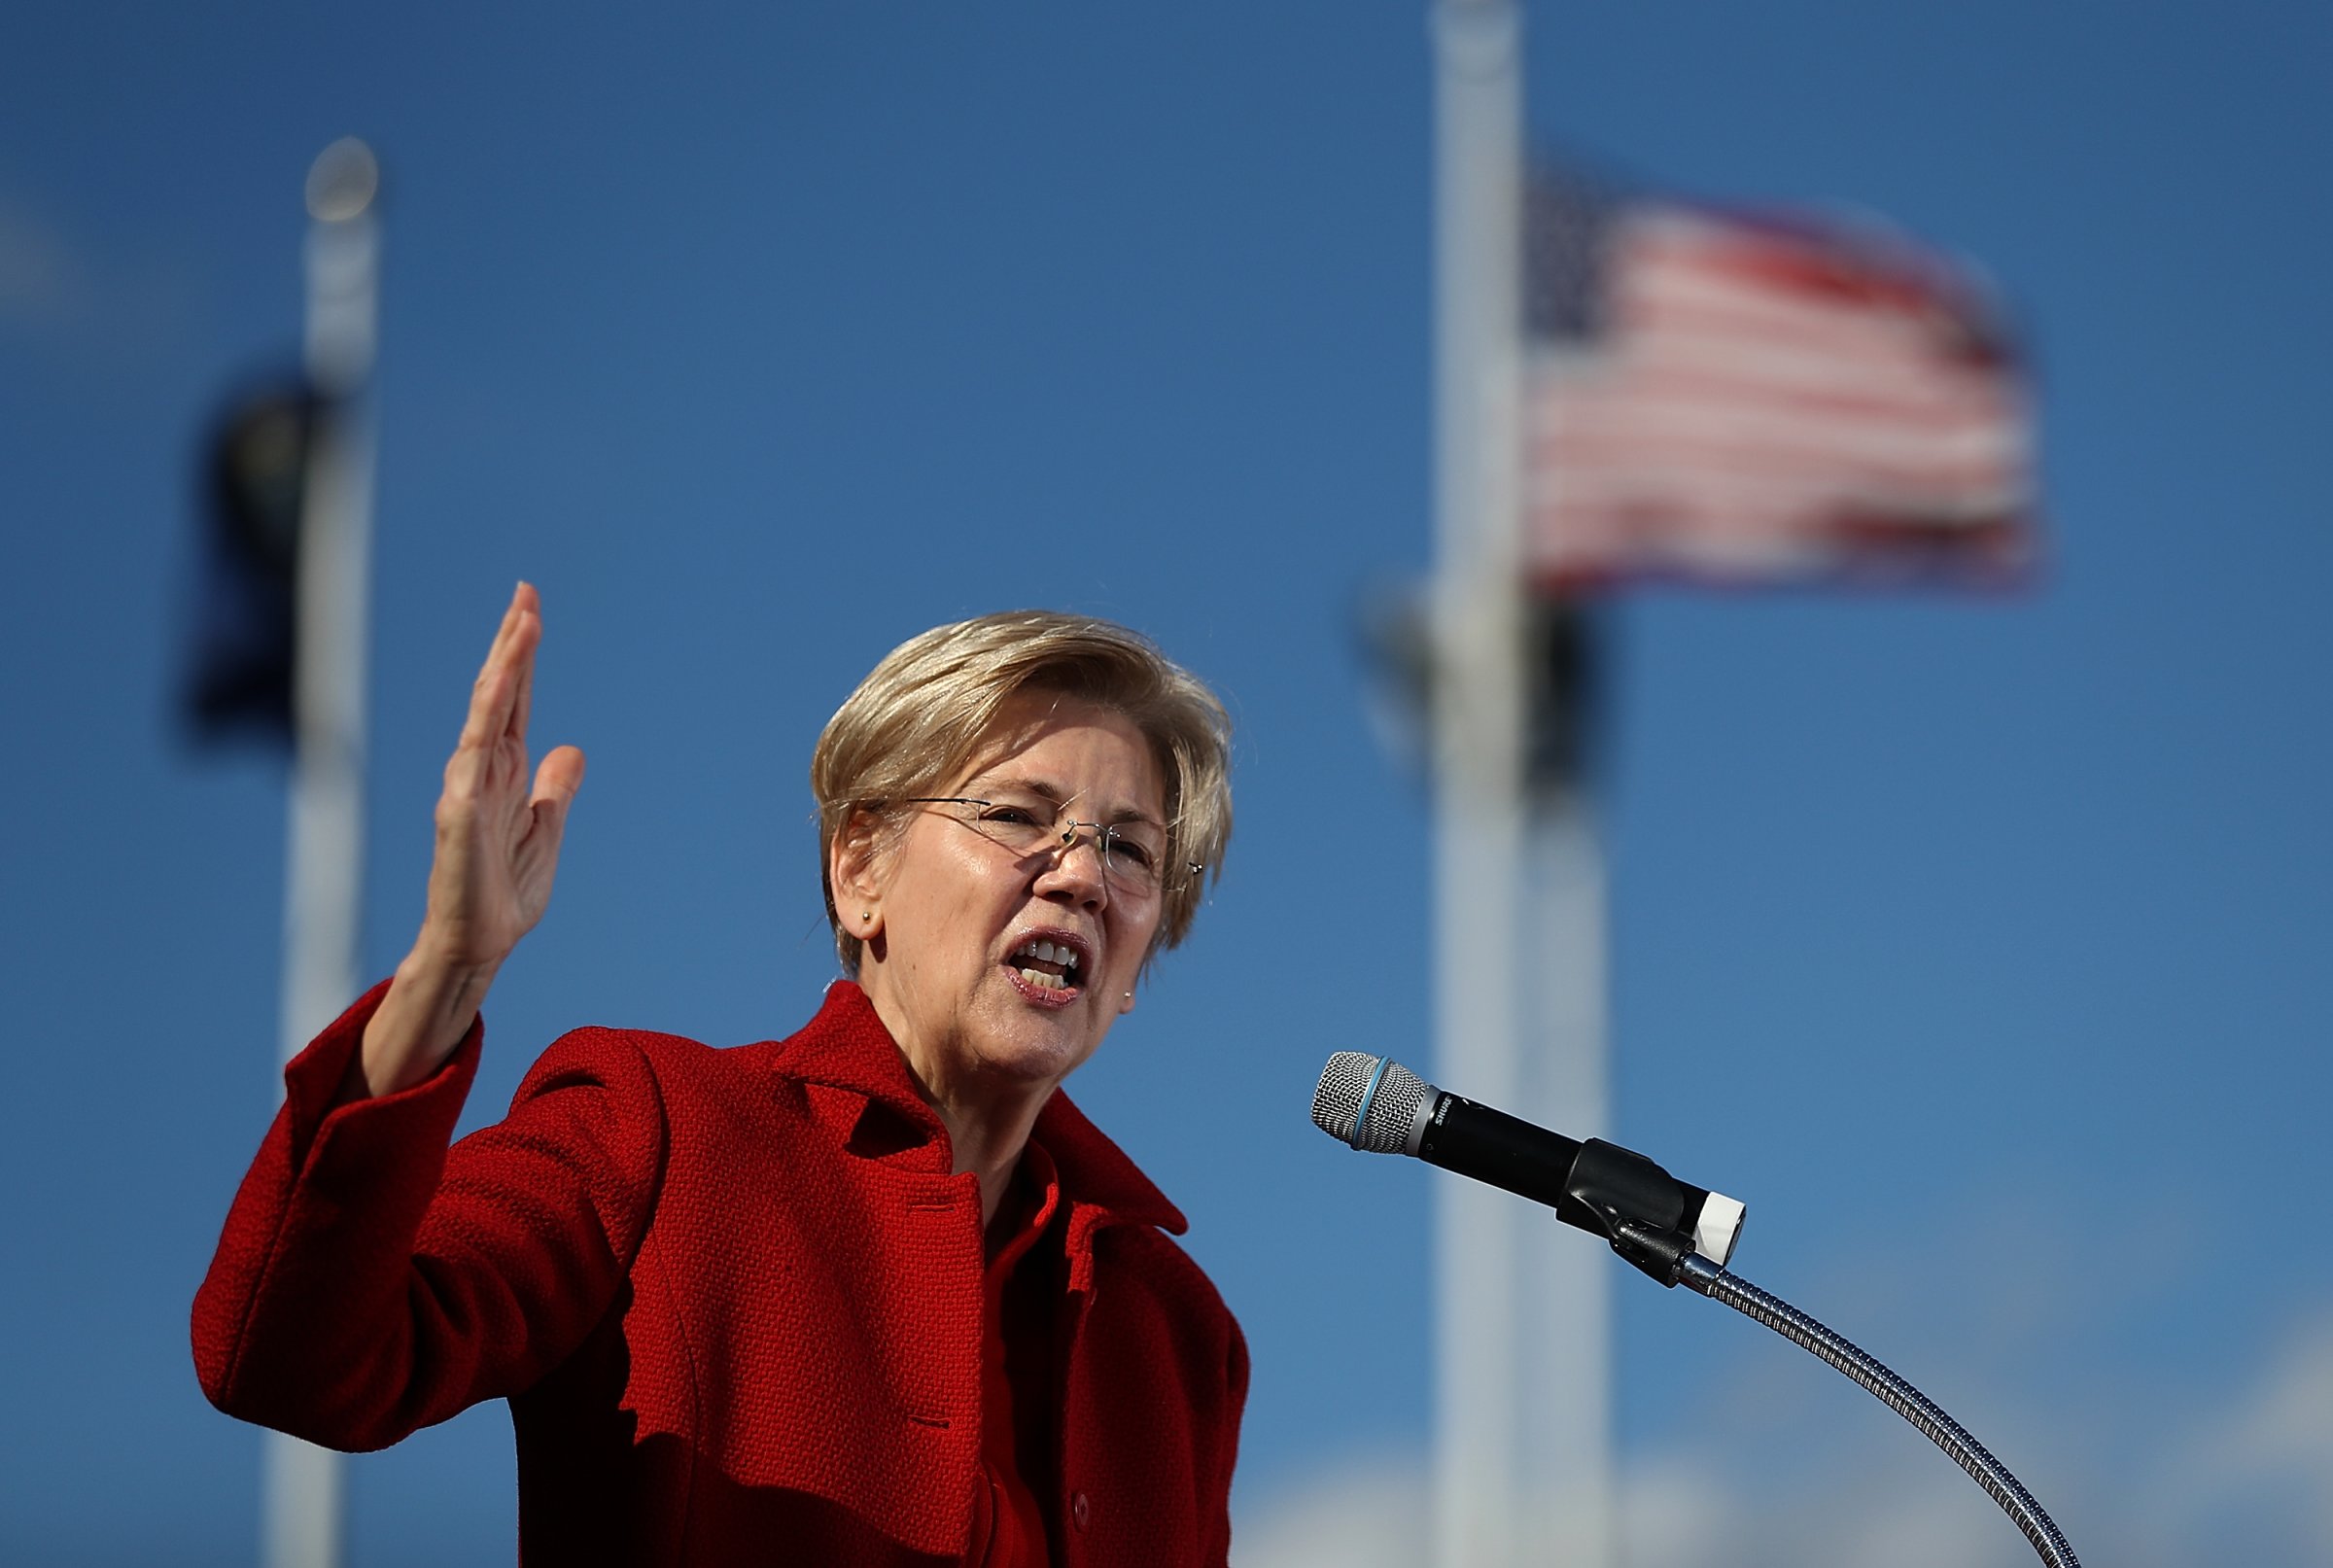 U.S. Sen. Elizabeth Warren (D-MA) speaks during a campaign rally with democratic presidential nominee former Secretary of State Hillary Clinton at St Saint Anselm College on October 24, 2016 in Manchester, New Hampshire.